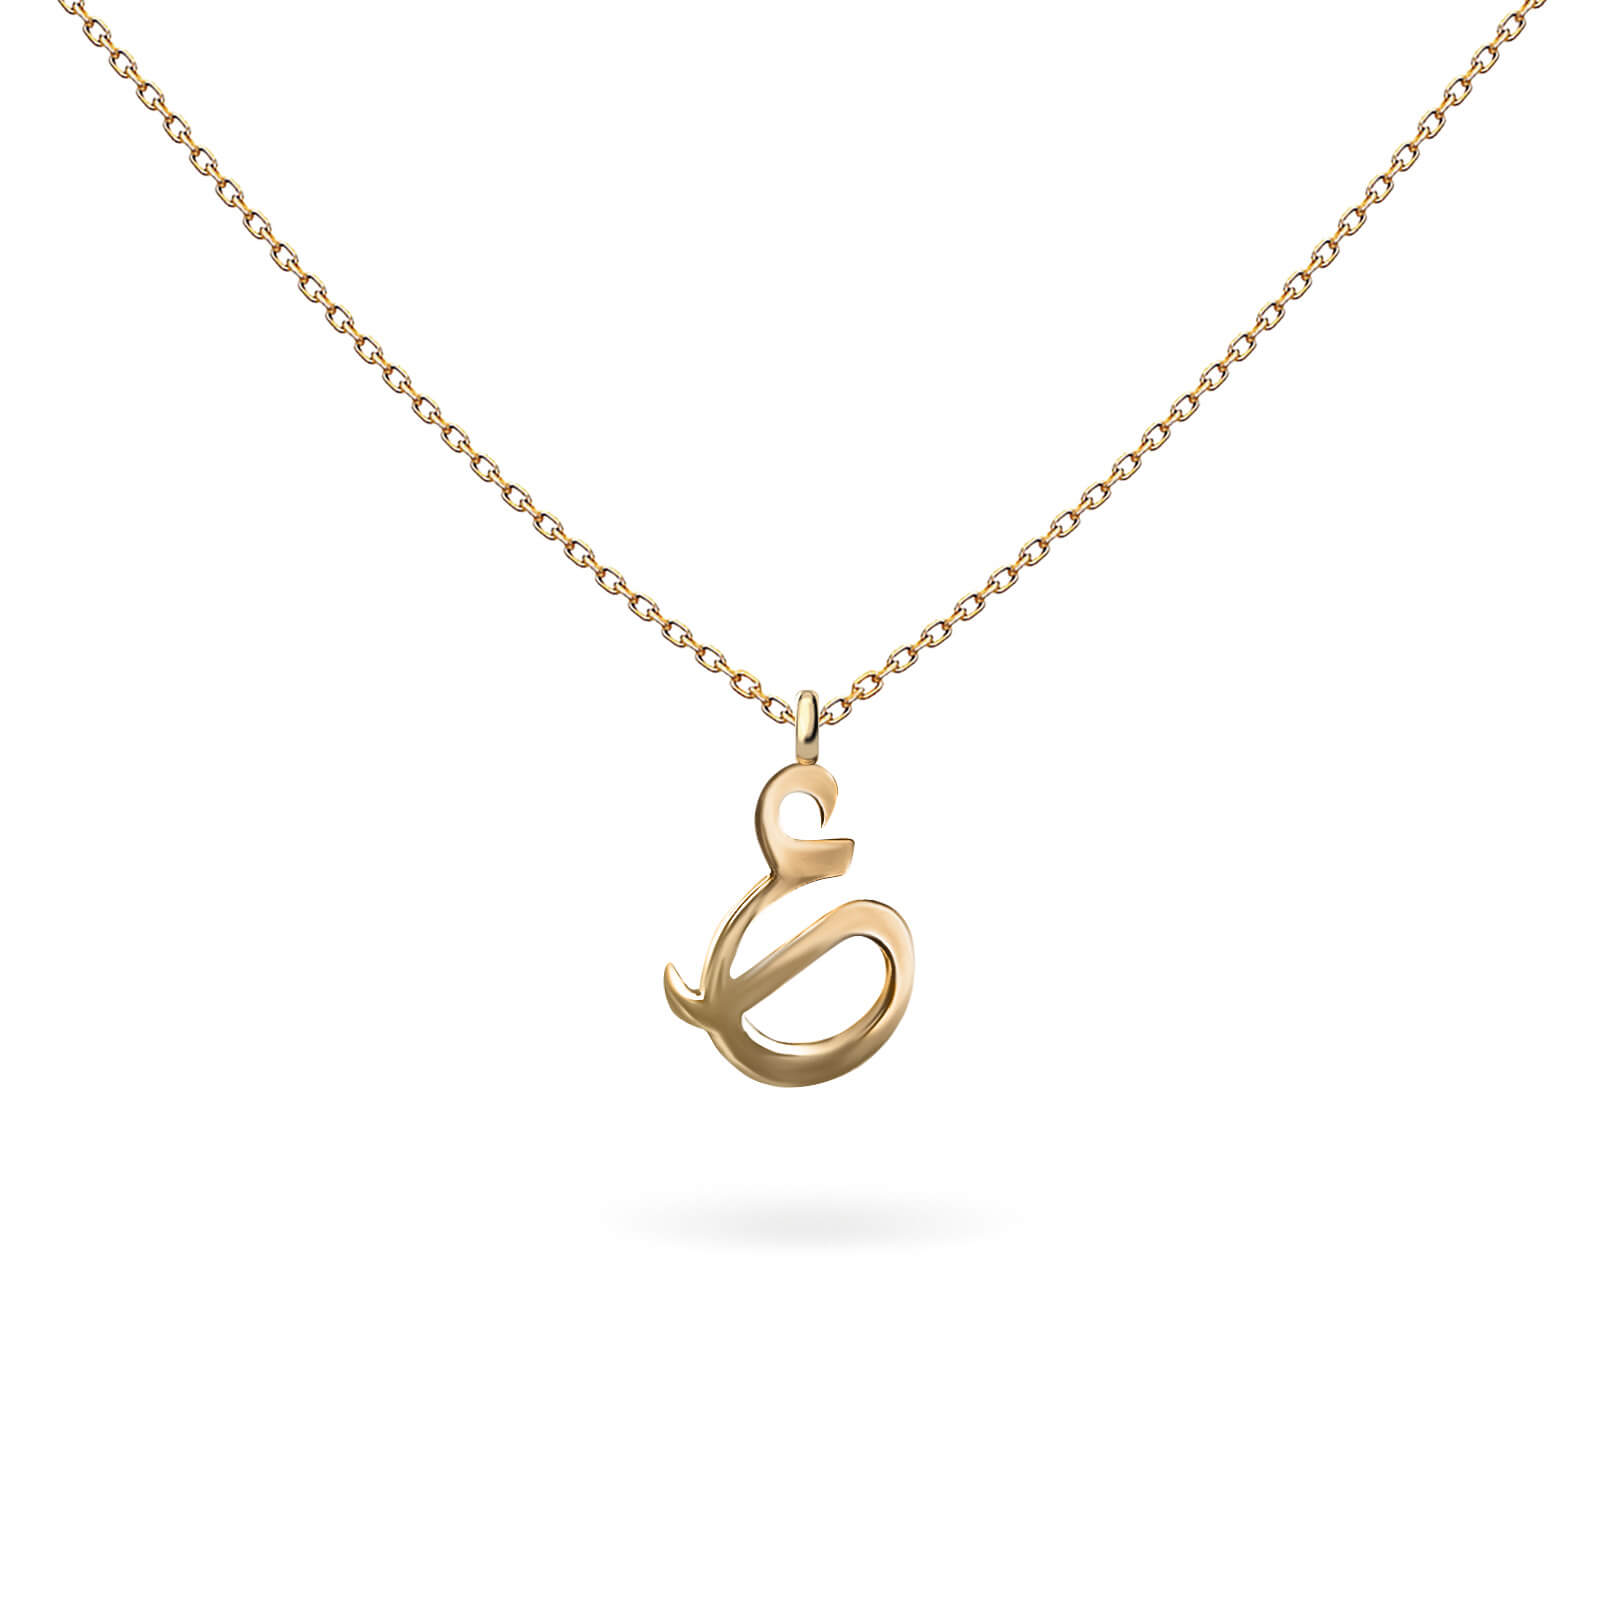 Buy Noon or n Arabic Letter Necklace Online in India - Etsy